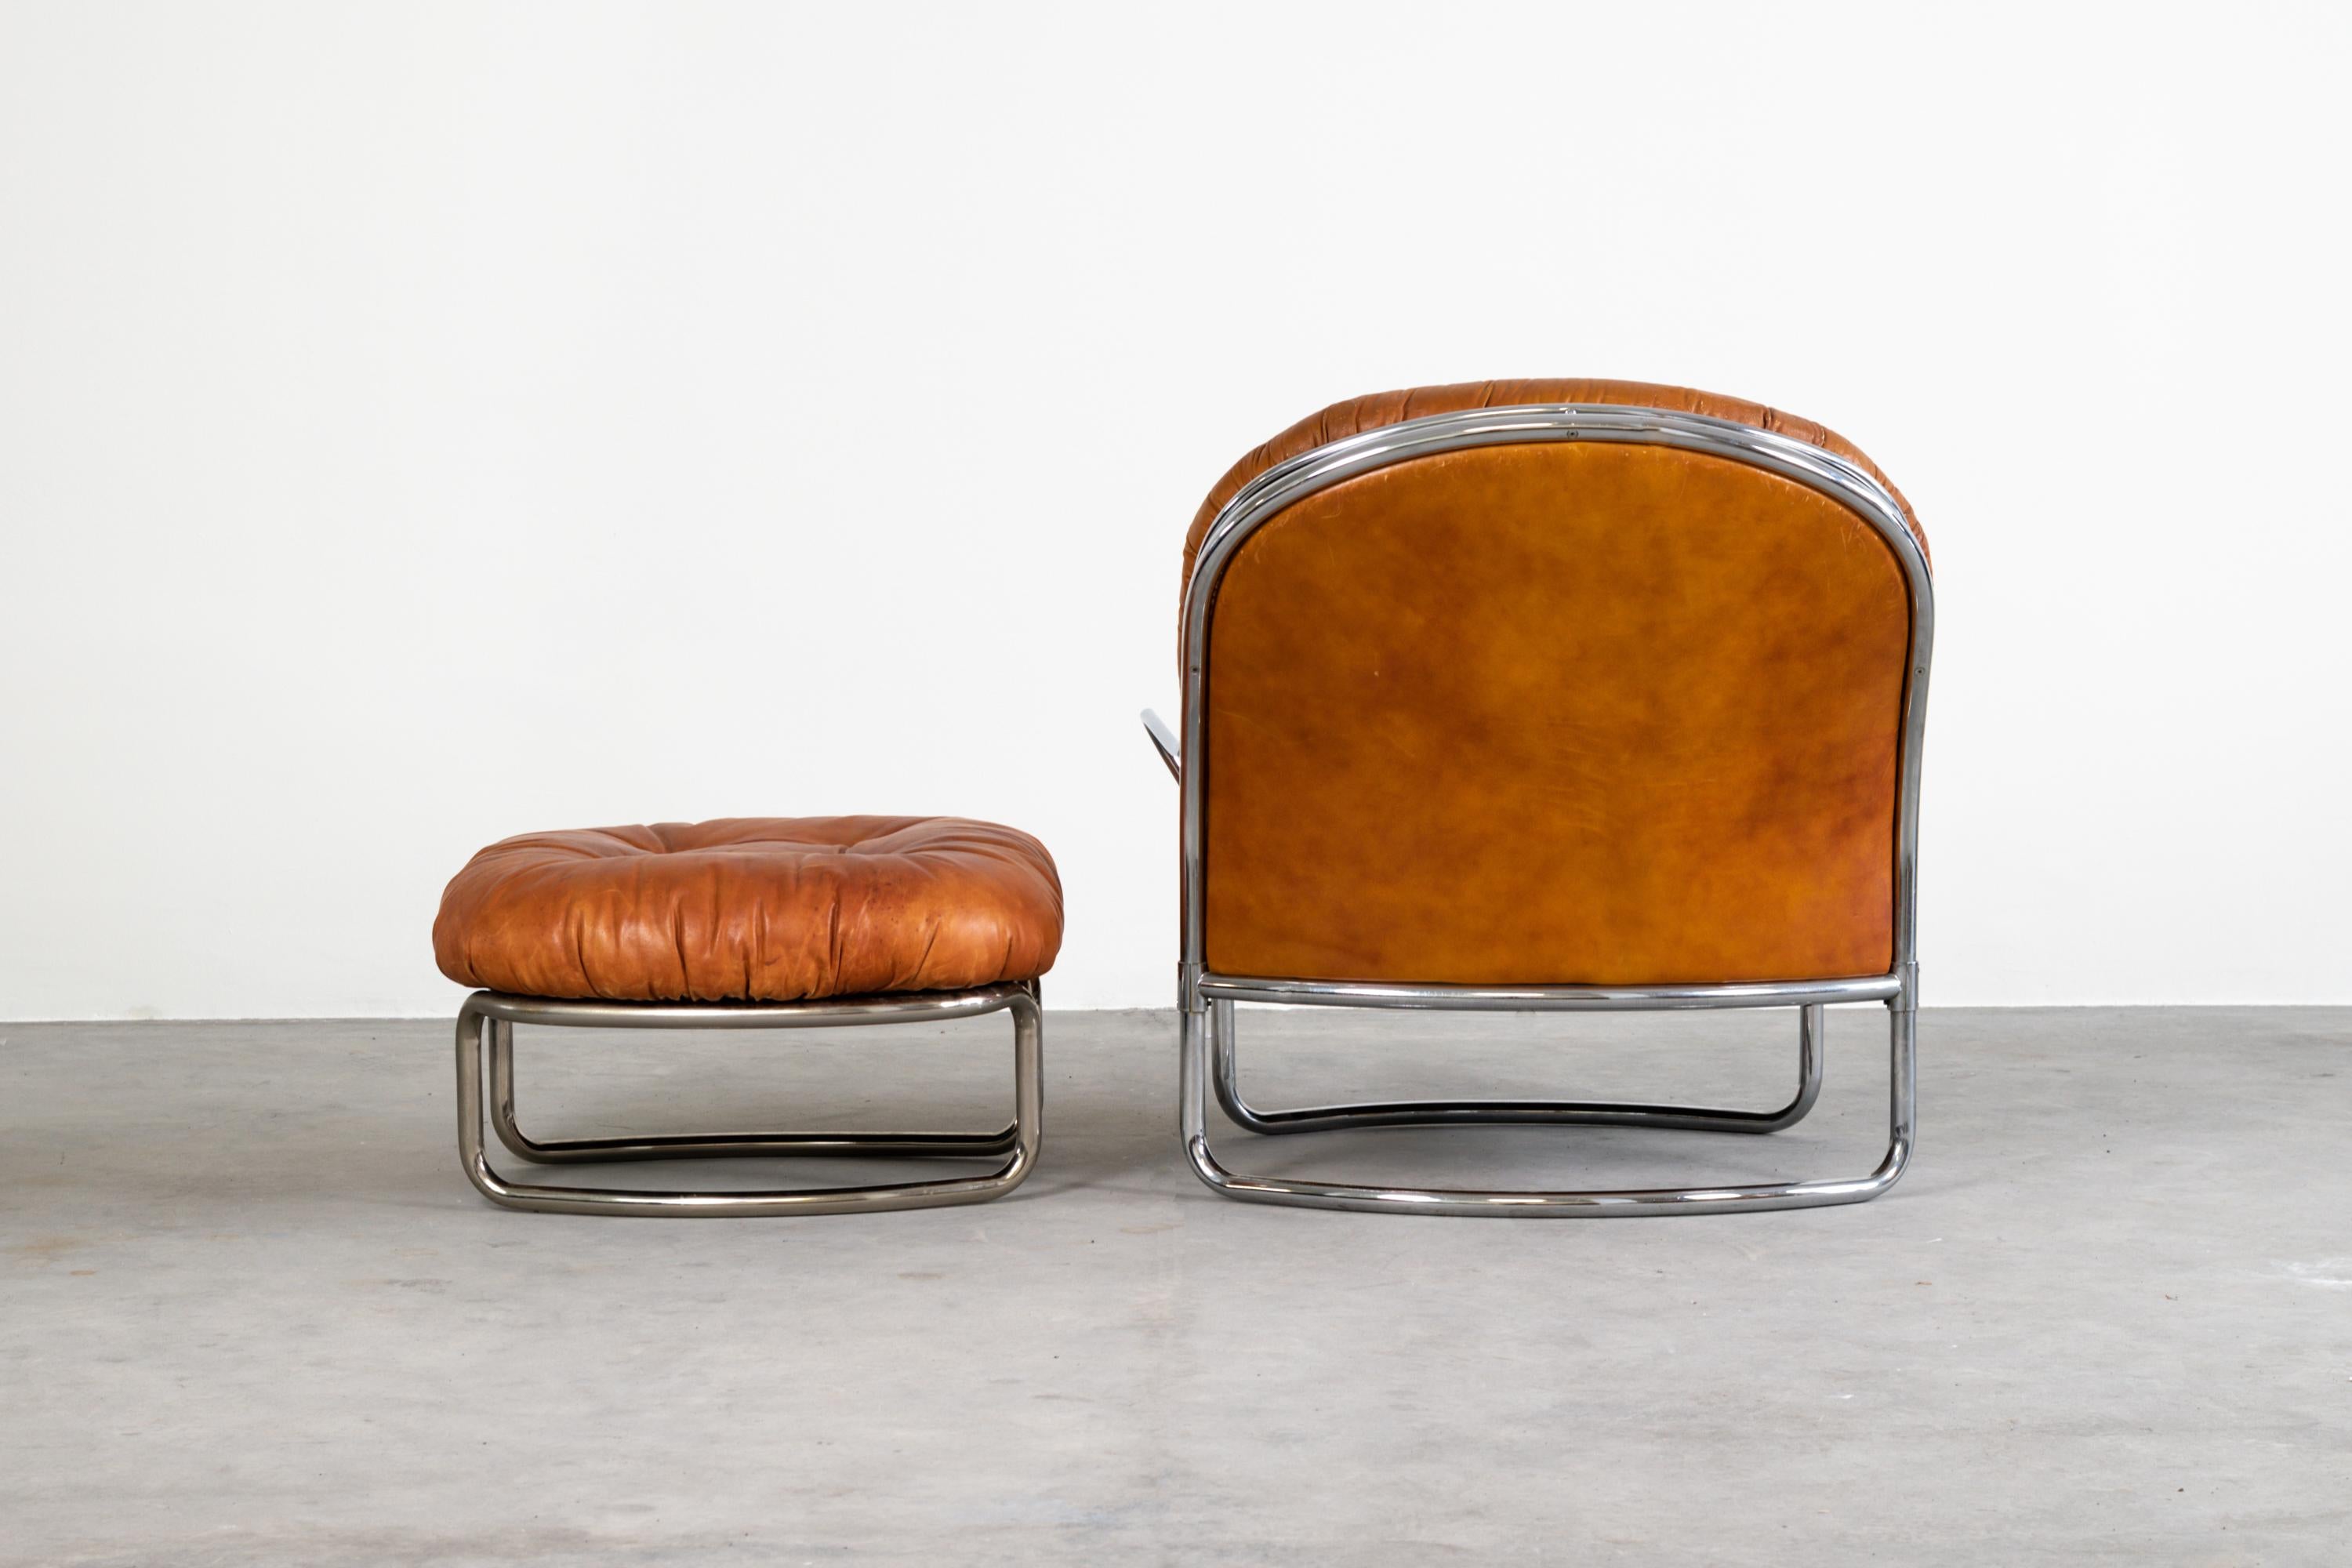 Plated Carlo de Carli Armchair and Footrest 915 in Cognac Leather for Cinova, 1969